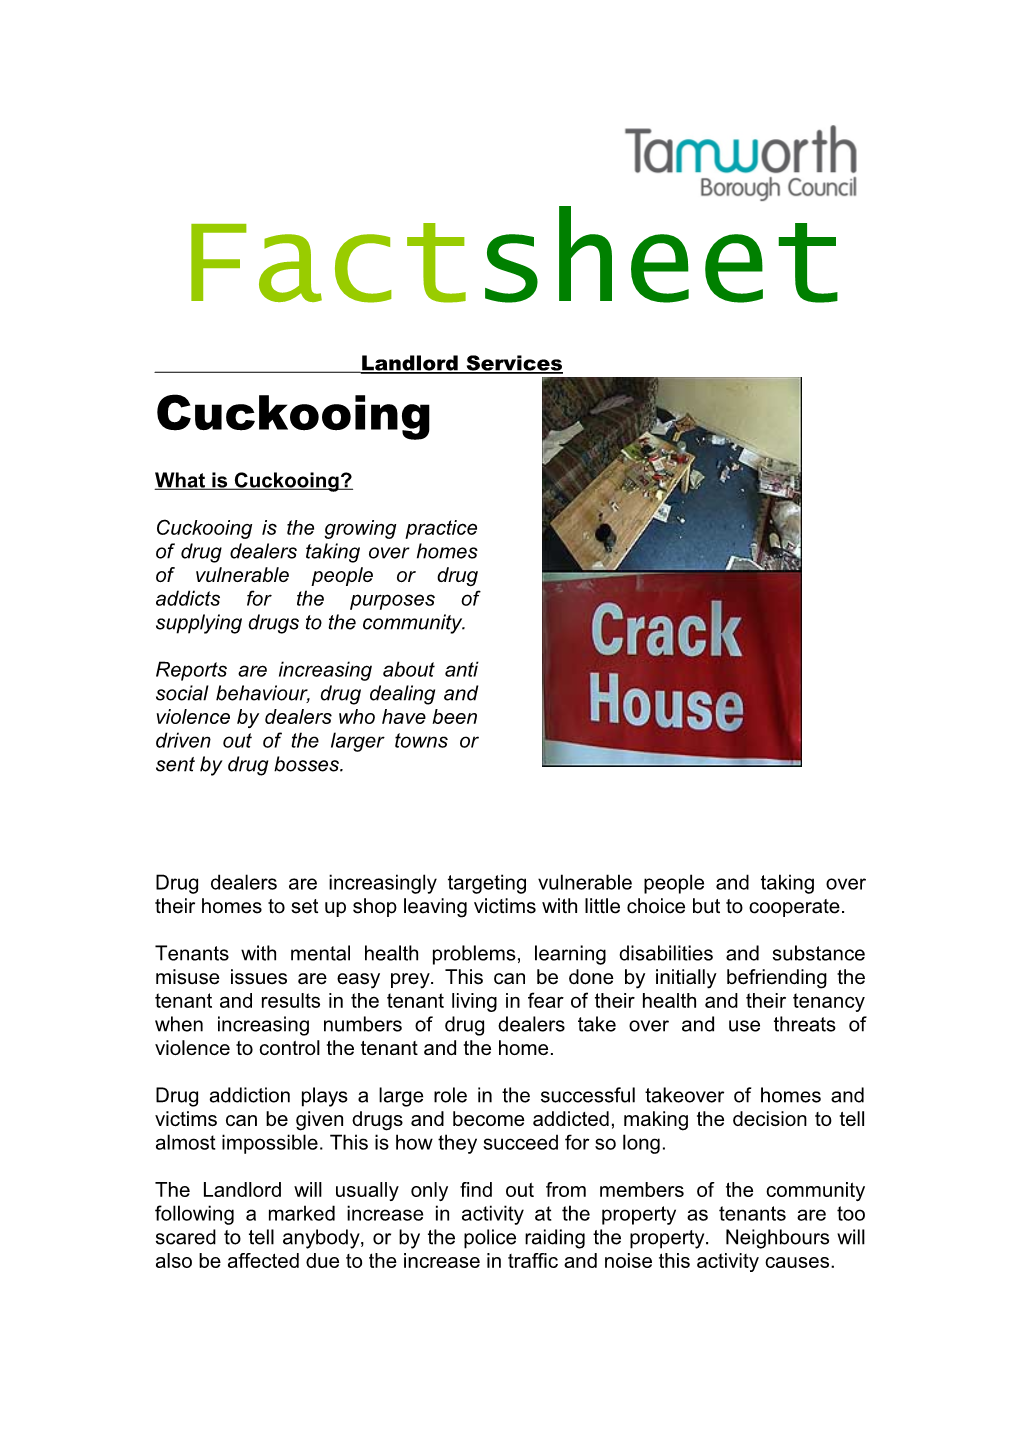 What Is Cuckooing?